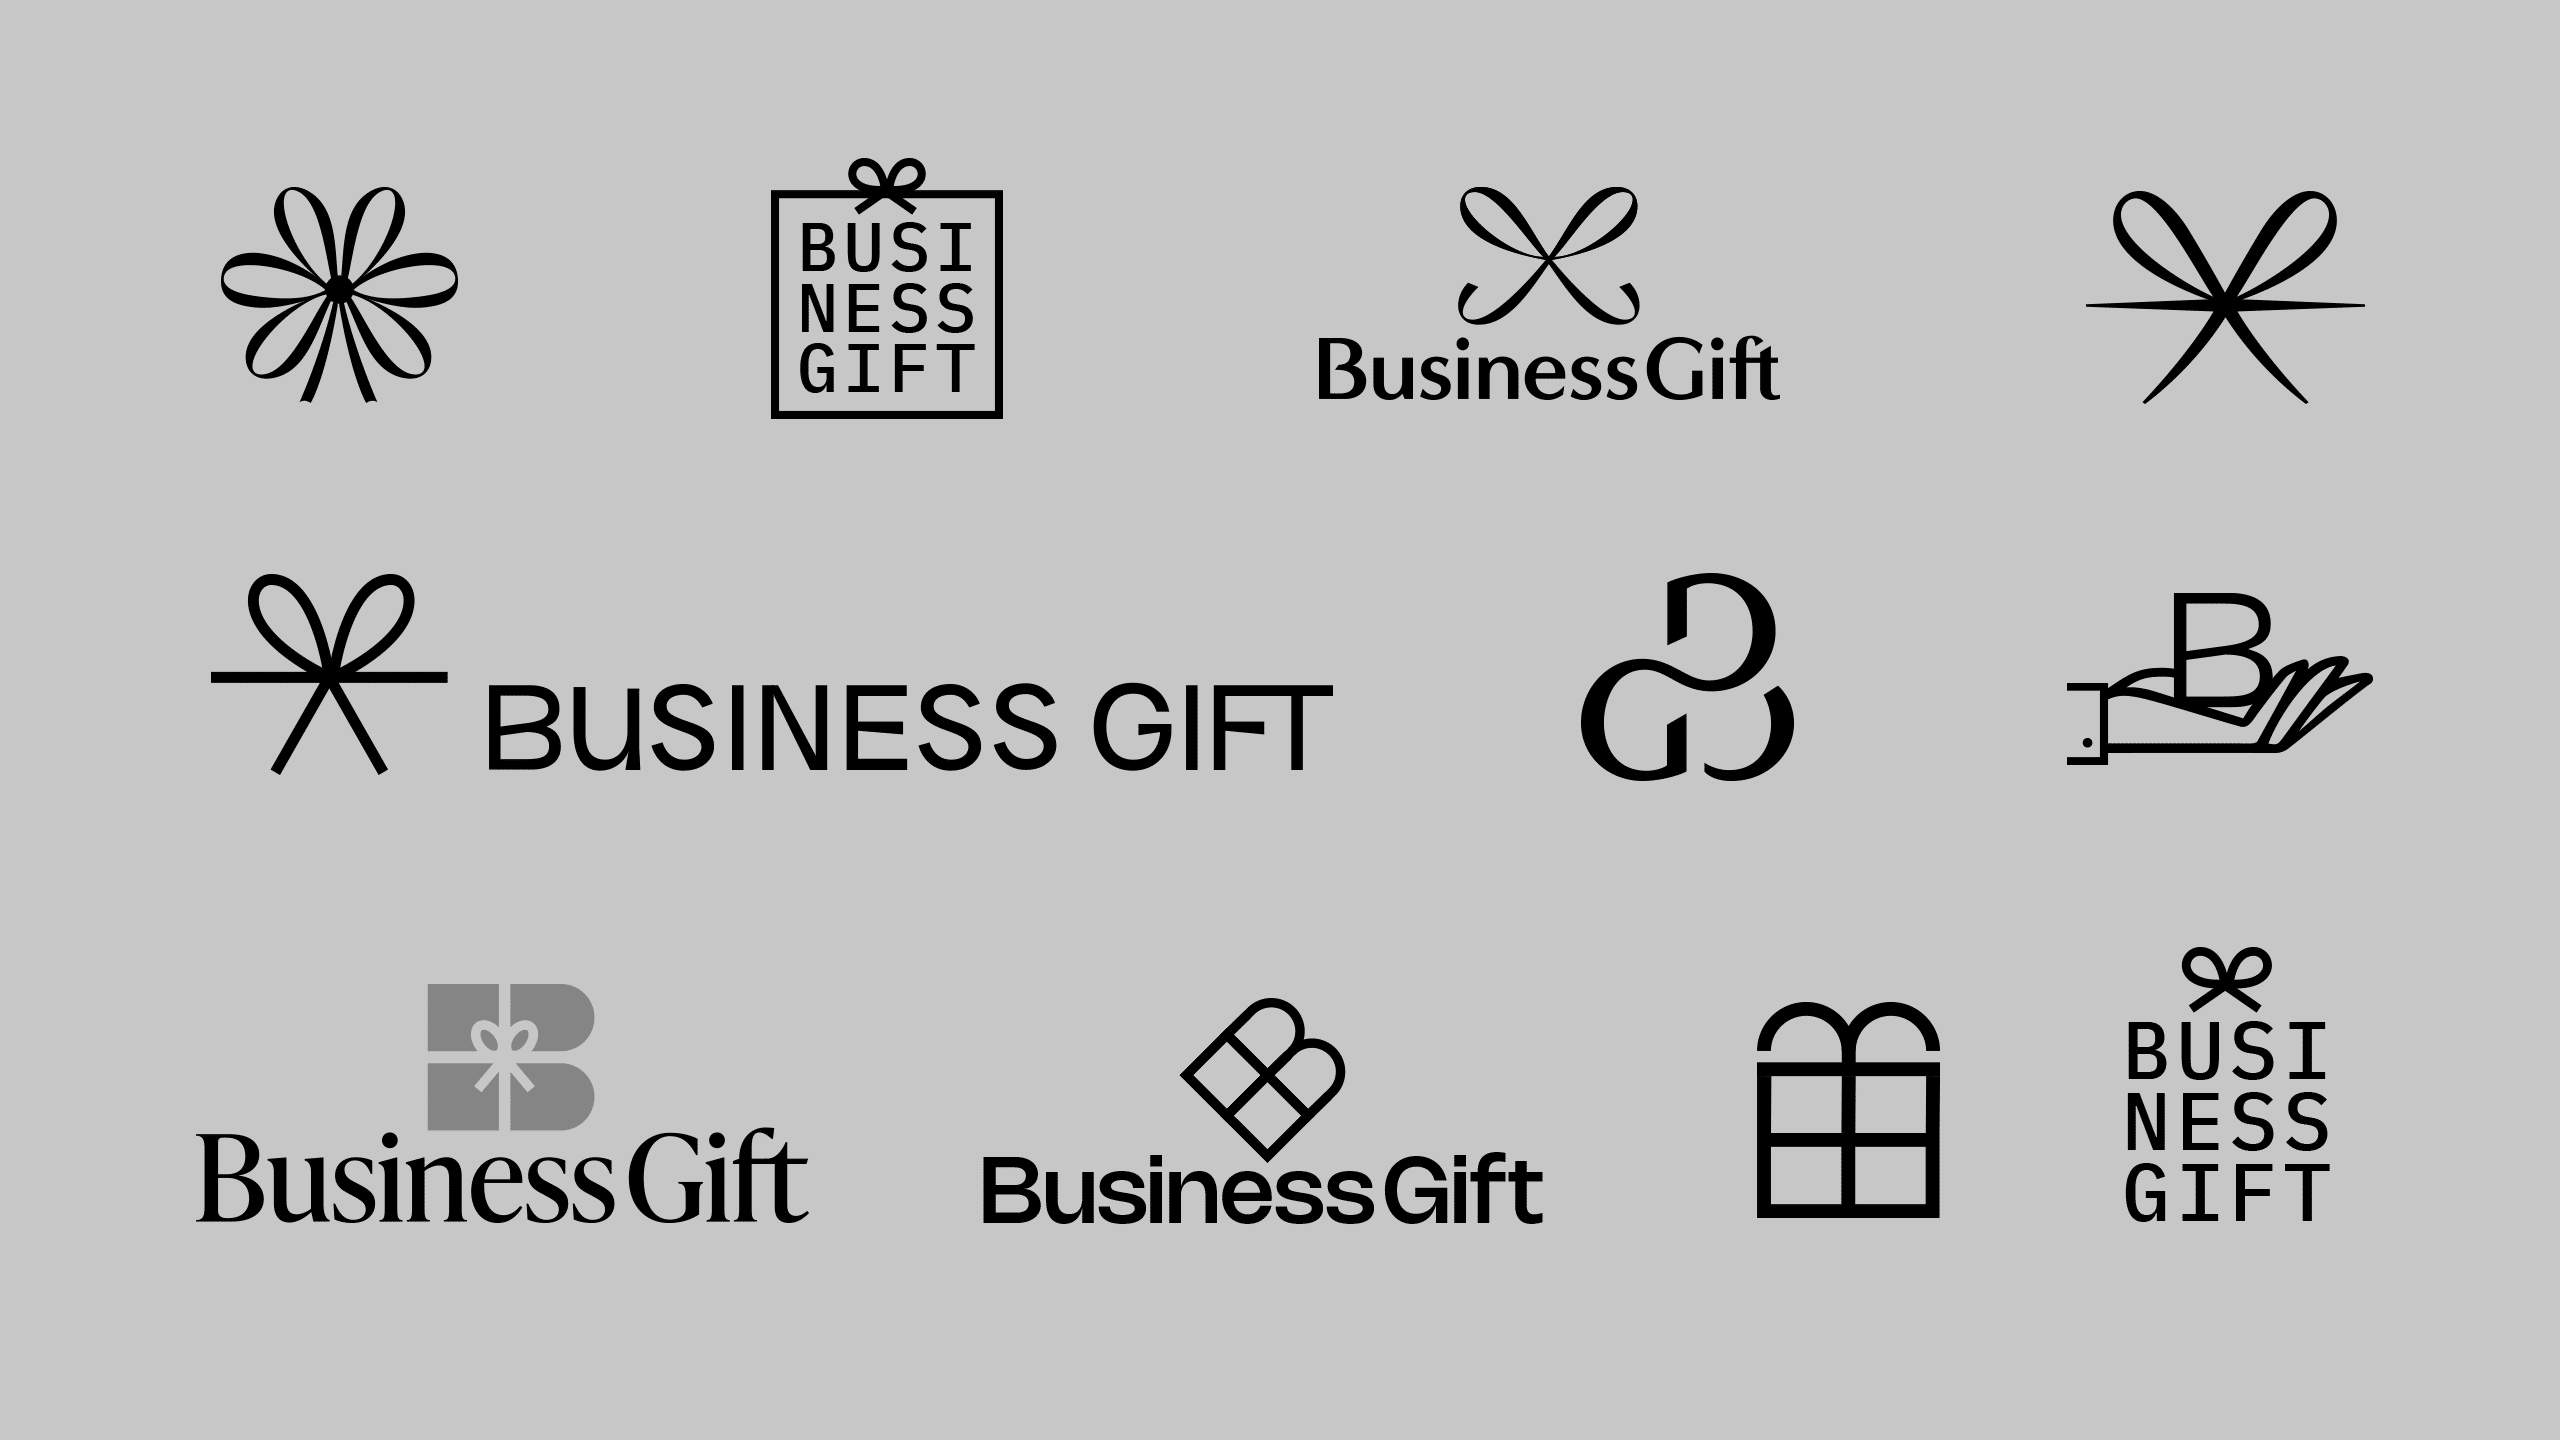 Digital sketches for the Business Gift logo. 